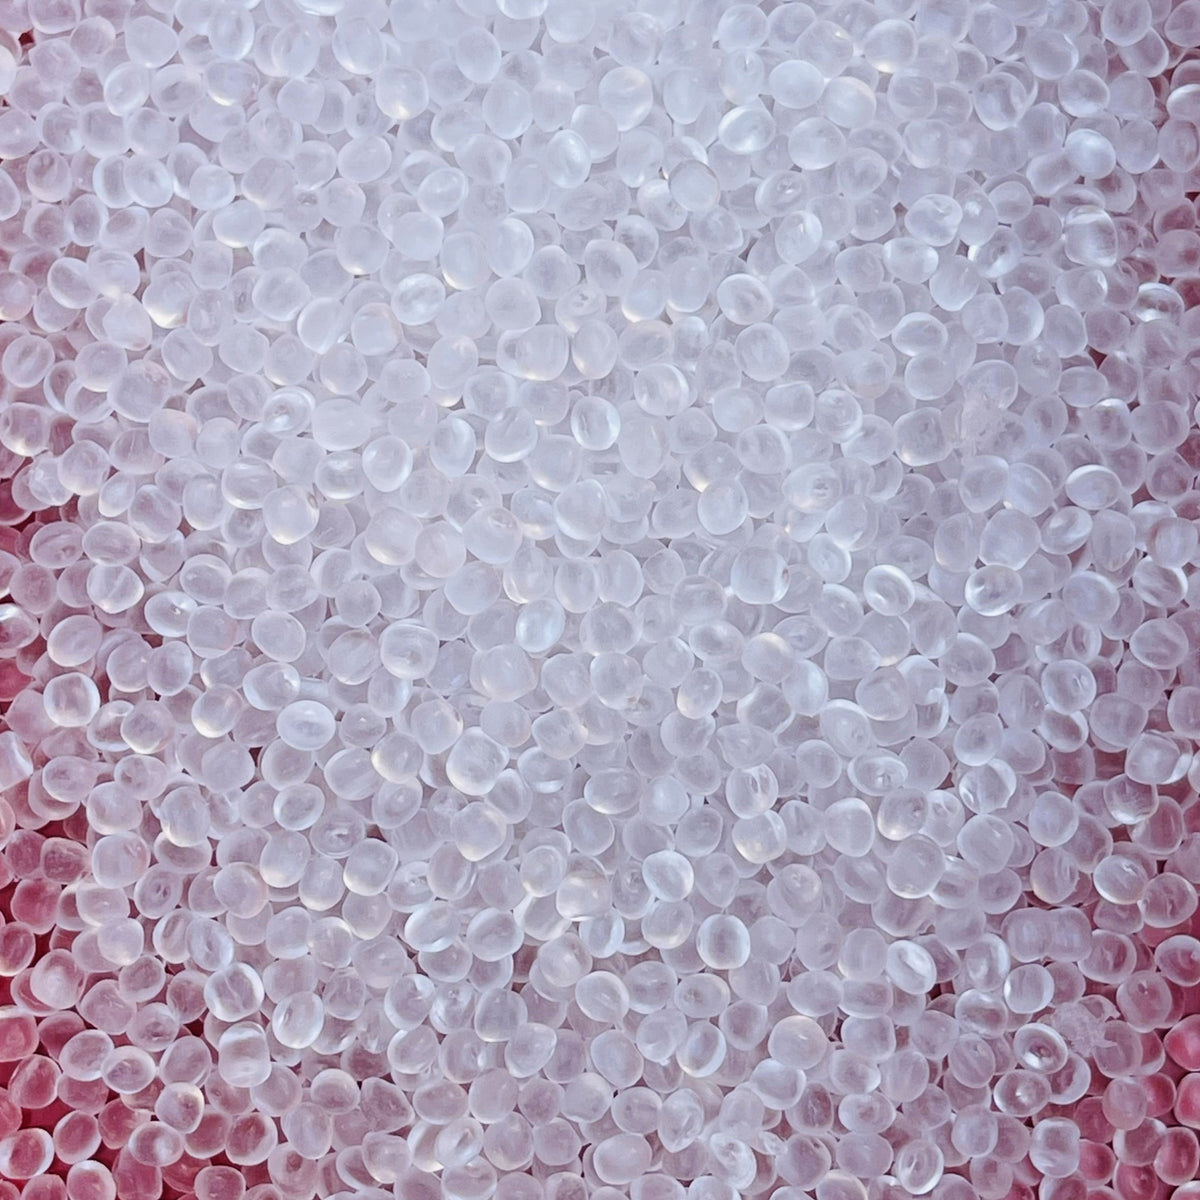 55 Lbs Unscented Aroma Beads 